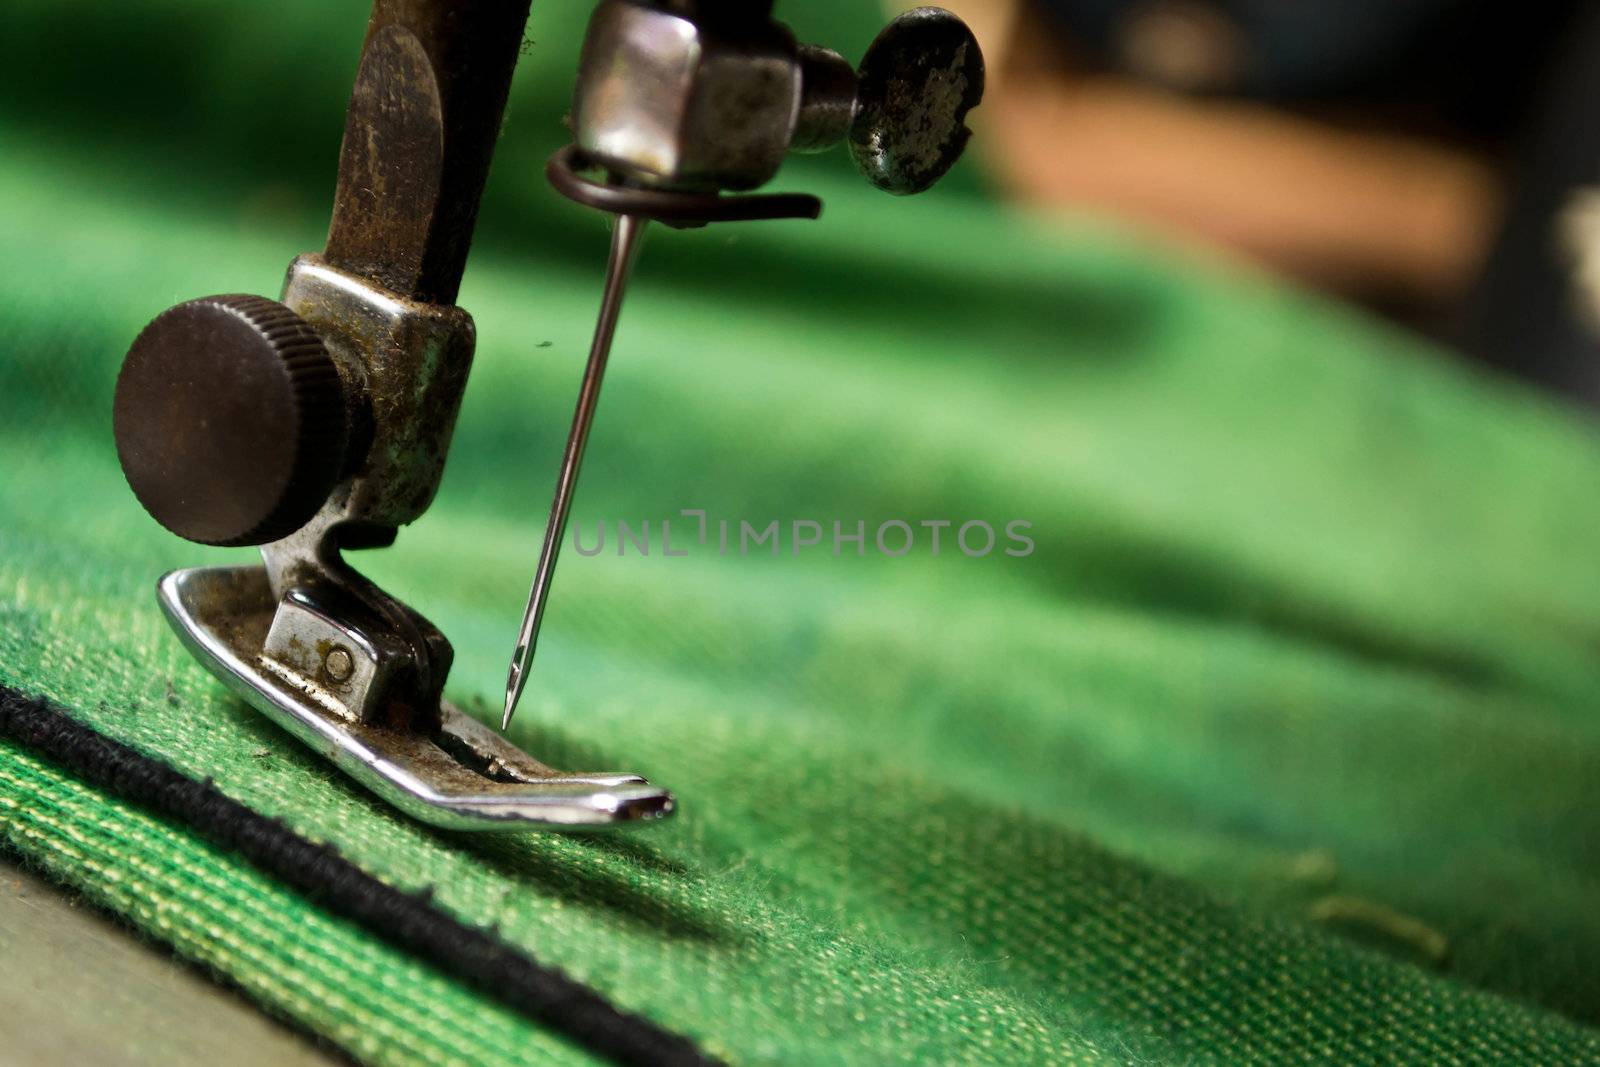 sewing process in the phase by Thanamat